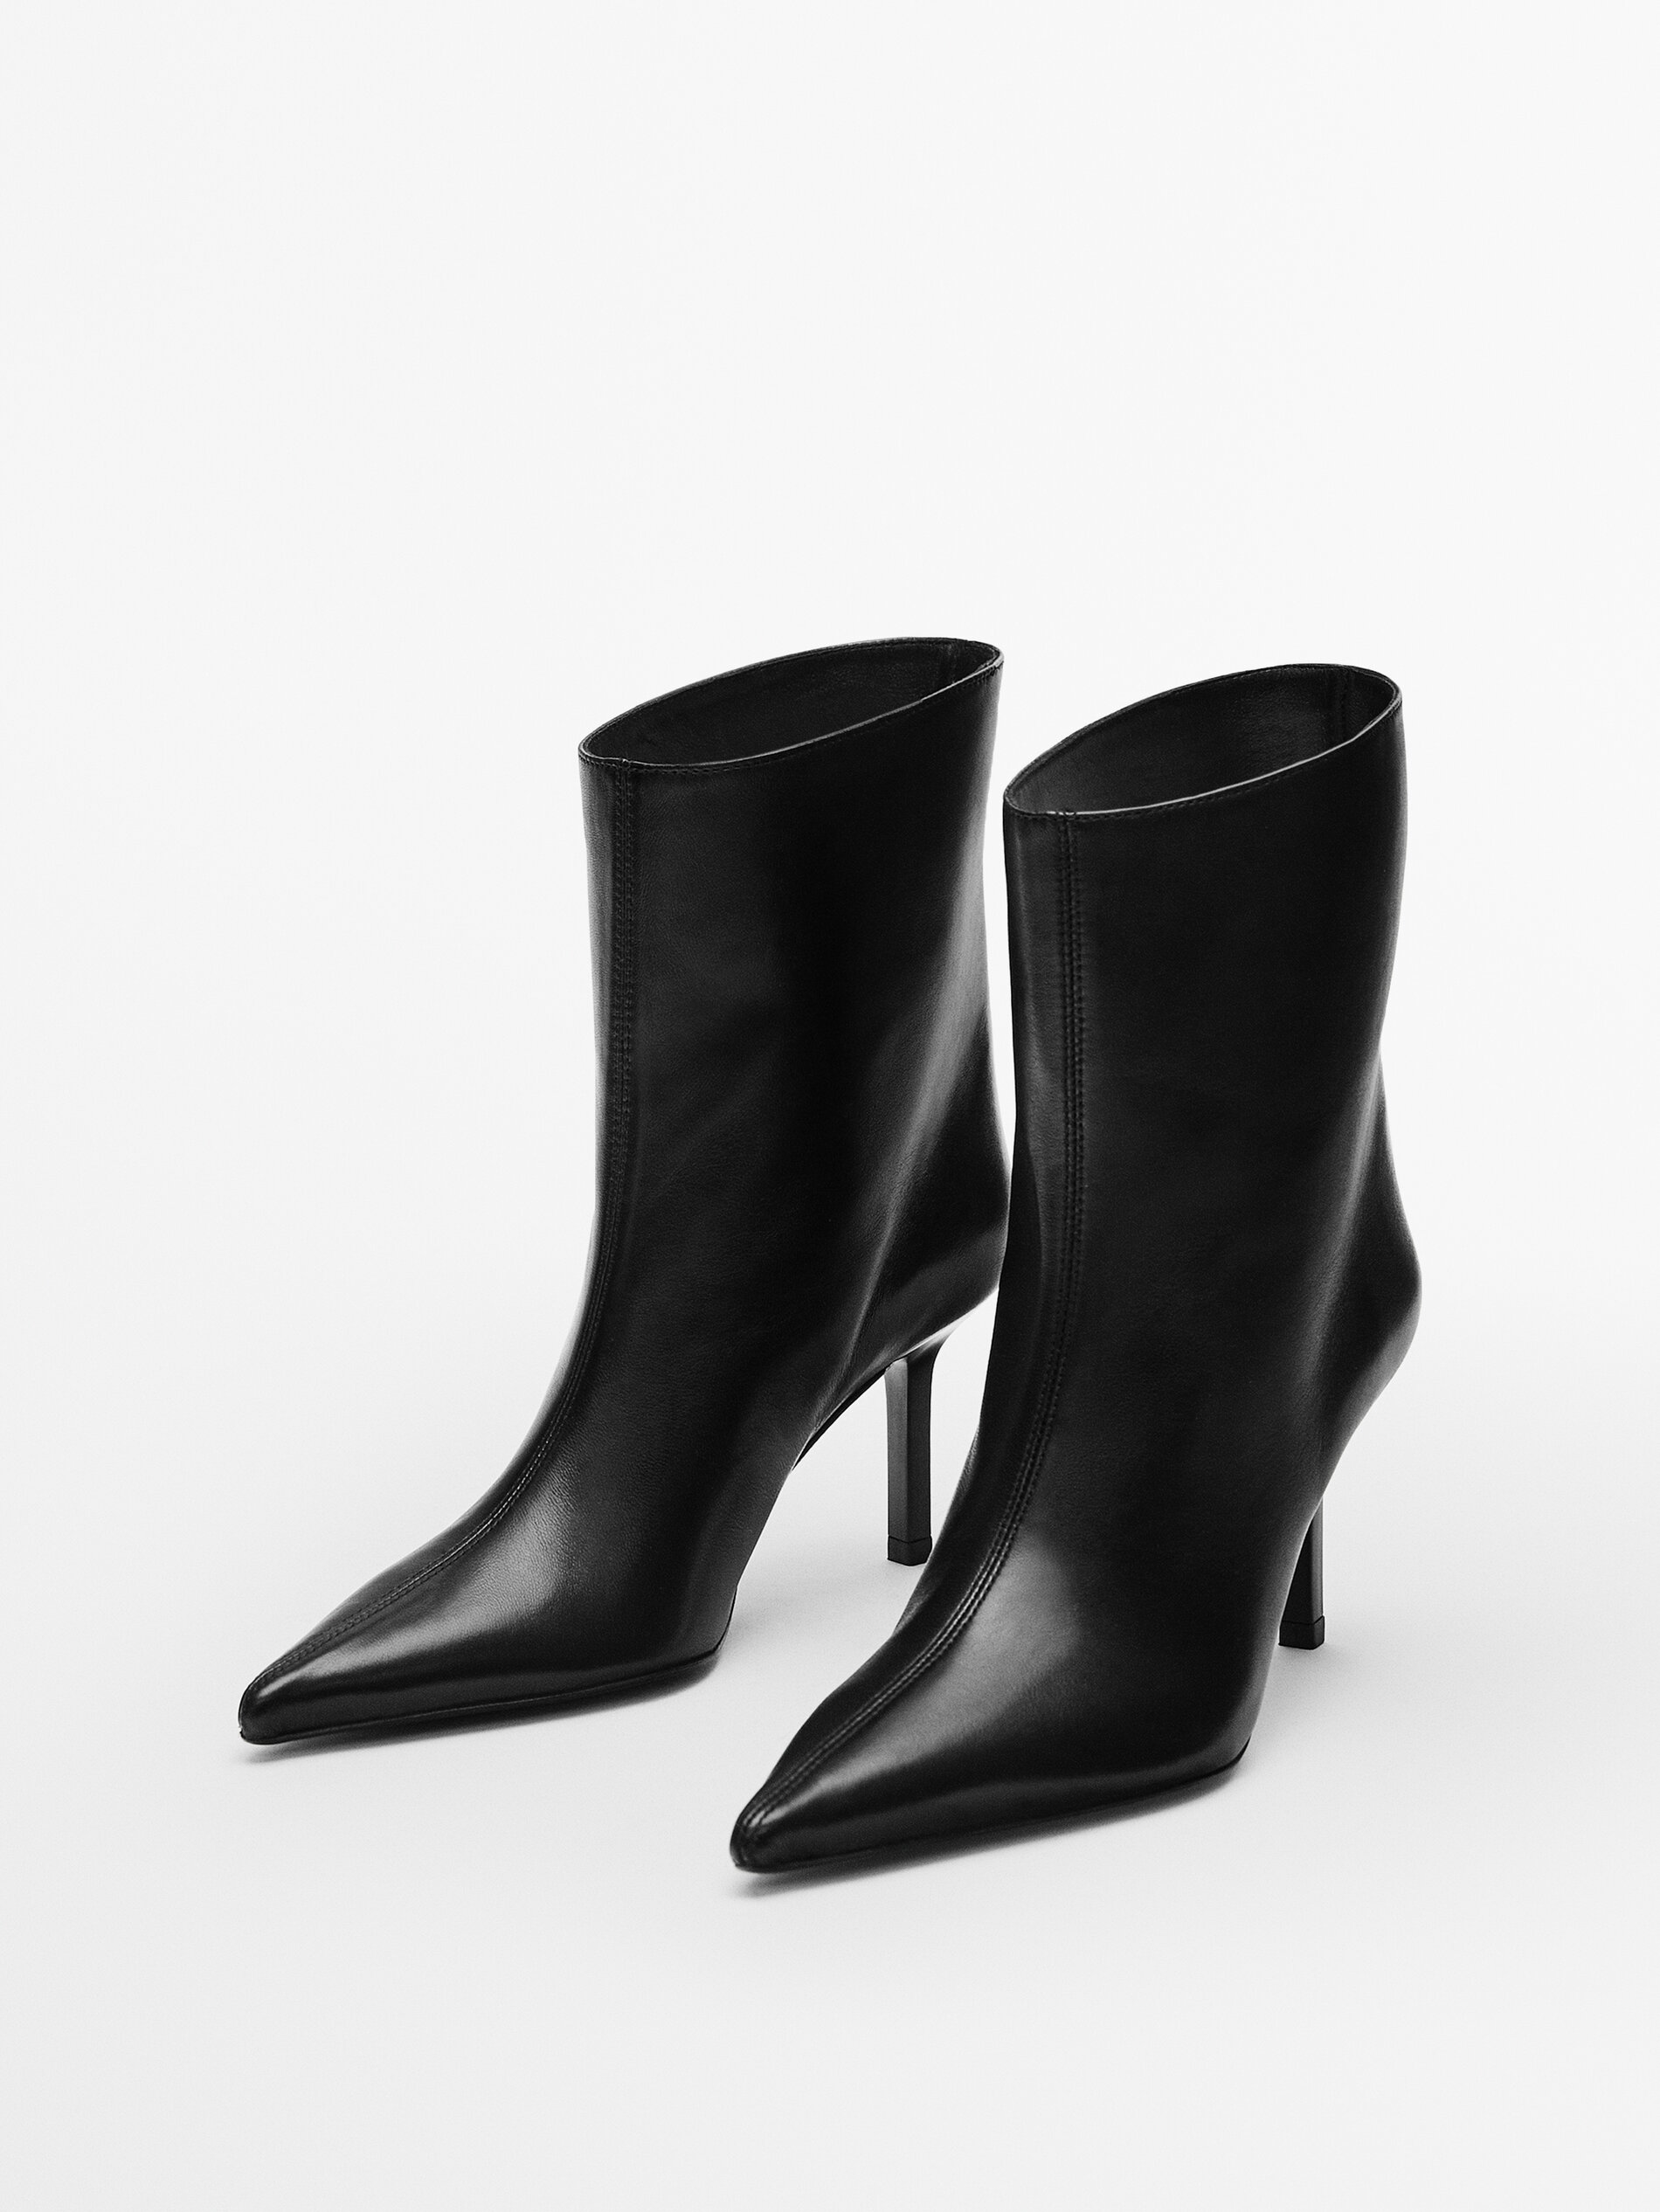 Massimo Dutti Leather High-Heel Ankle Boots With Wide Leg - Big Apple Buddy